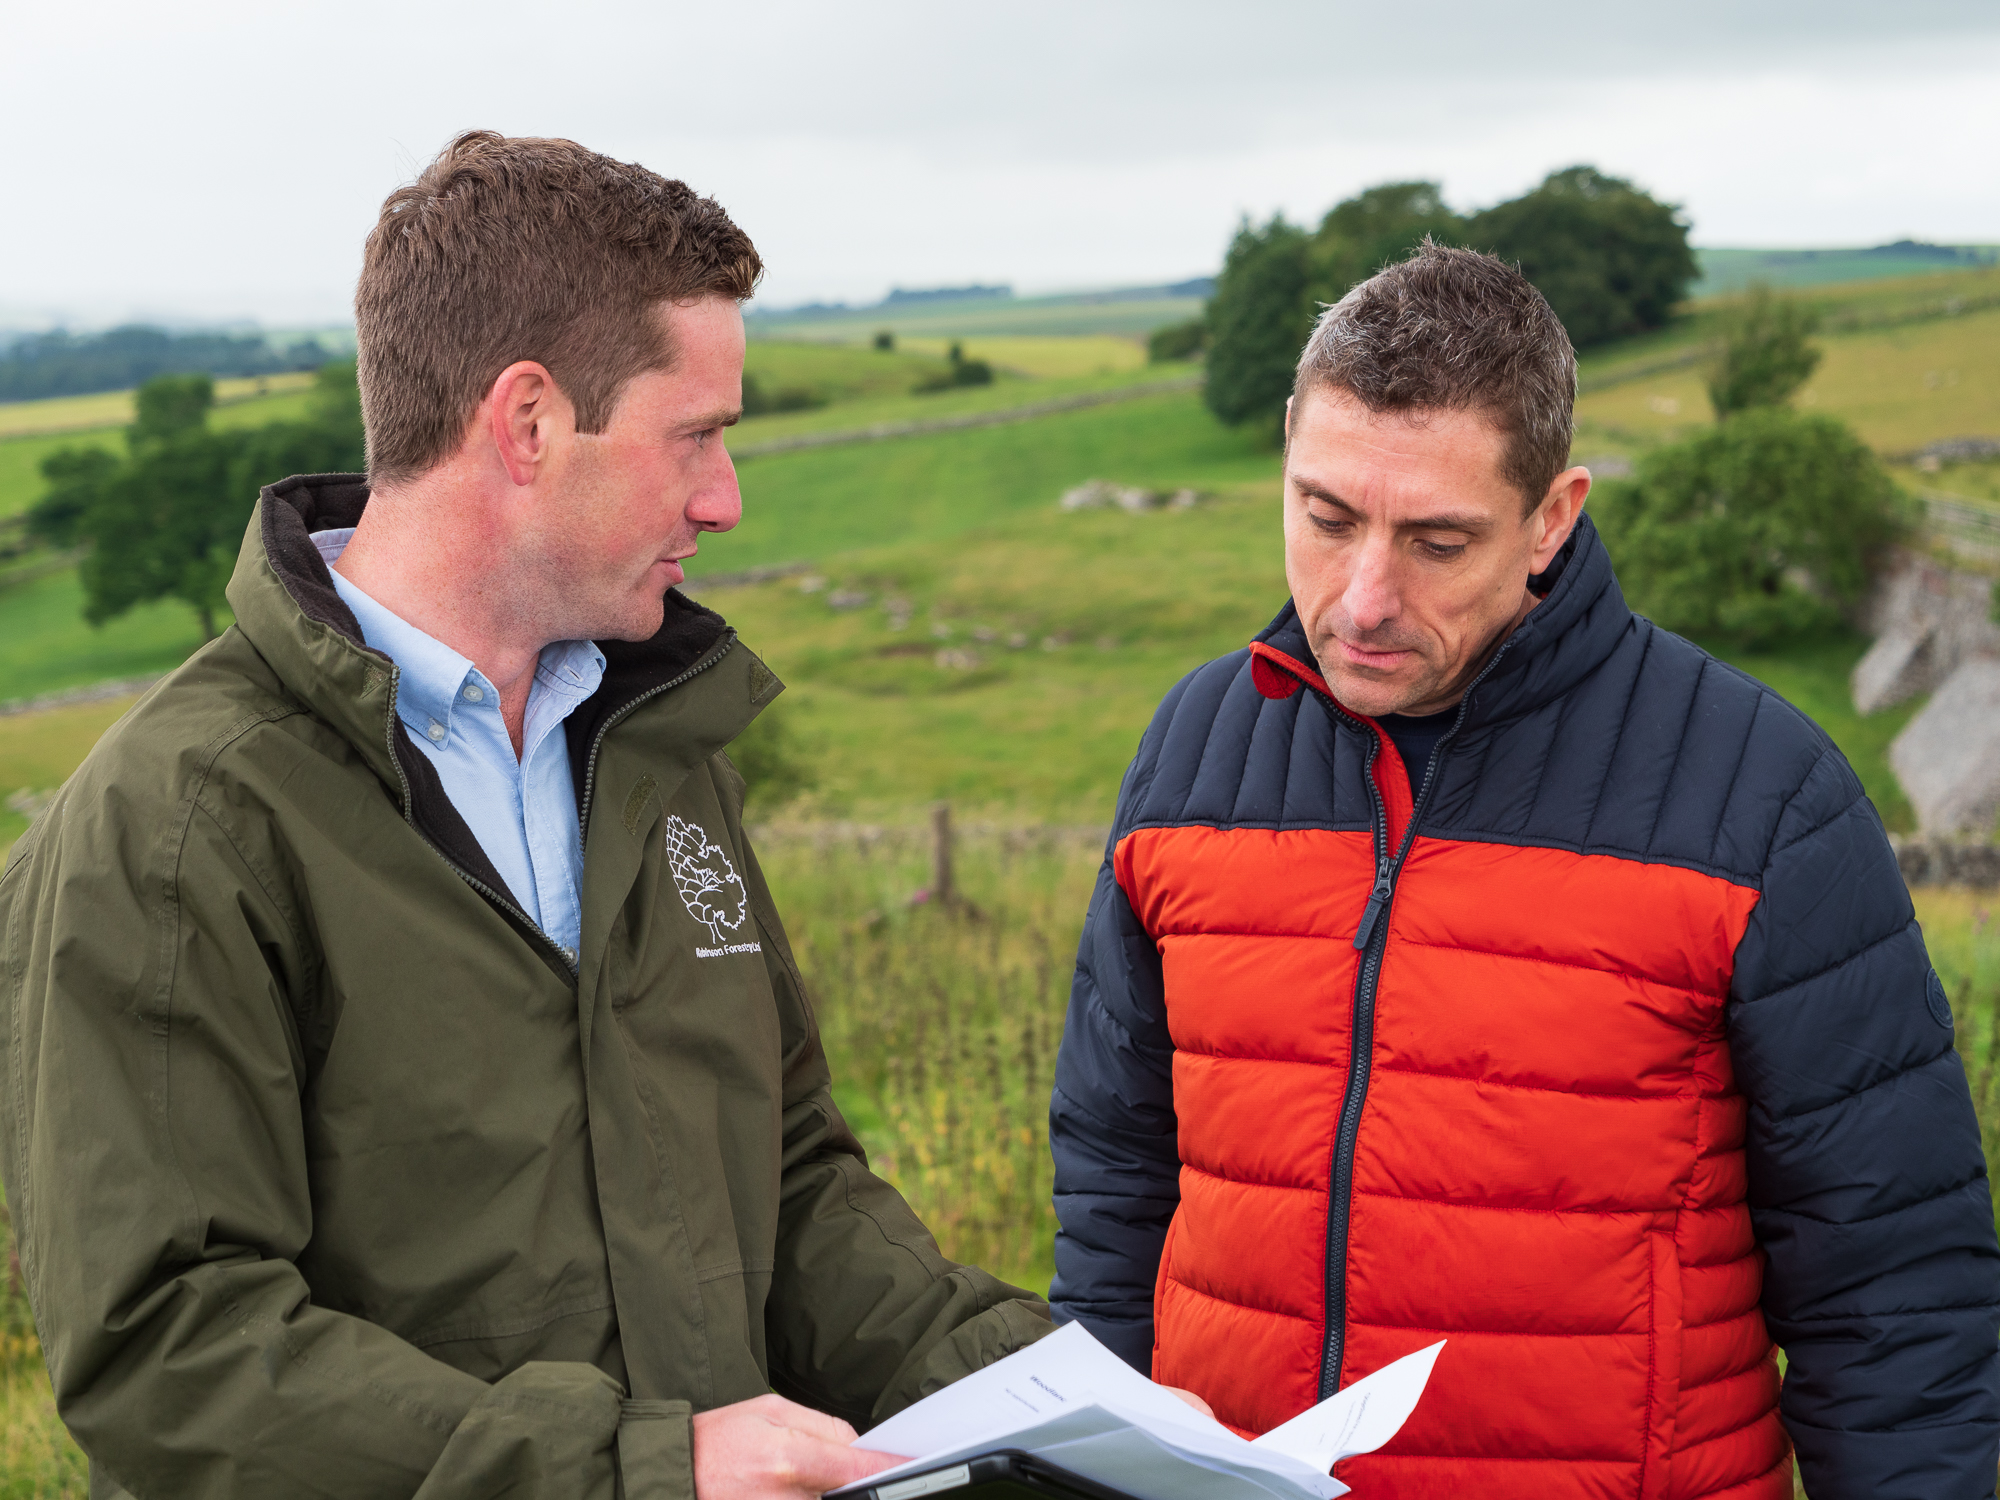 PIES project advisor Charles Robinson discusses a woodland creation project with Derbyshire landowner Phil.